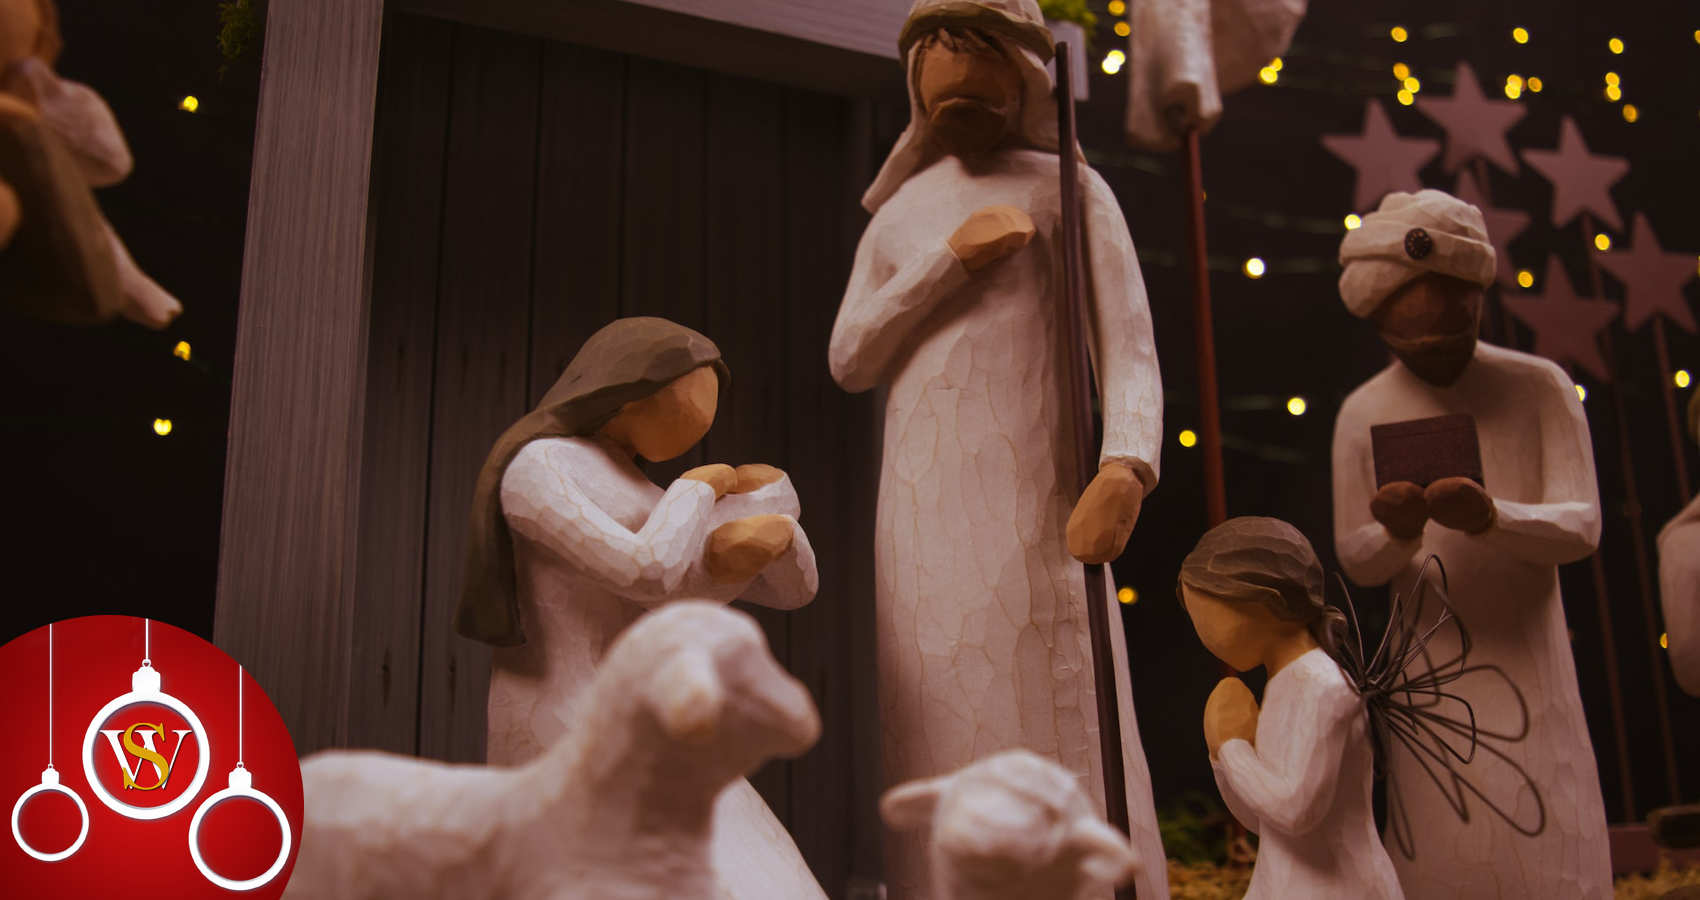 The Nativity Scene, story by Lauren Roman at Spillwords.com